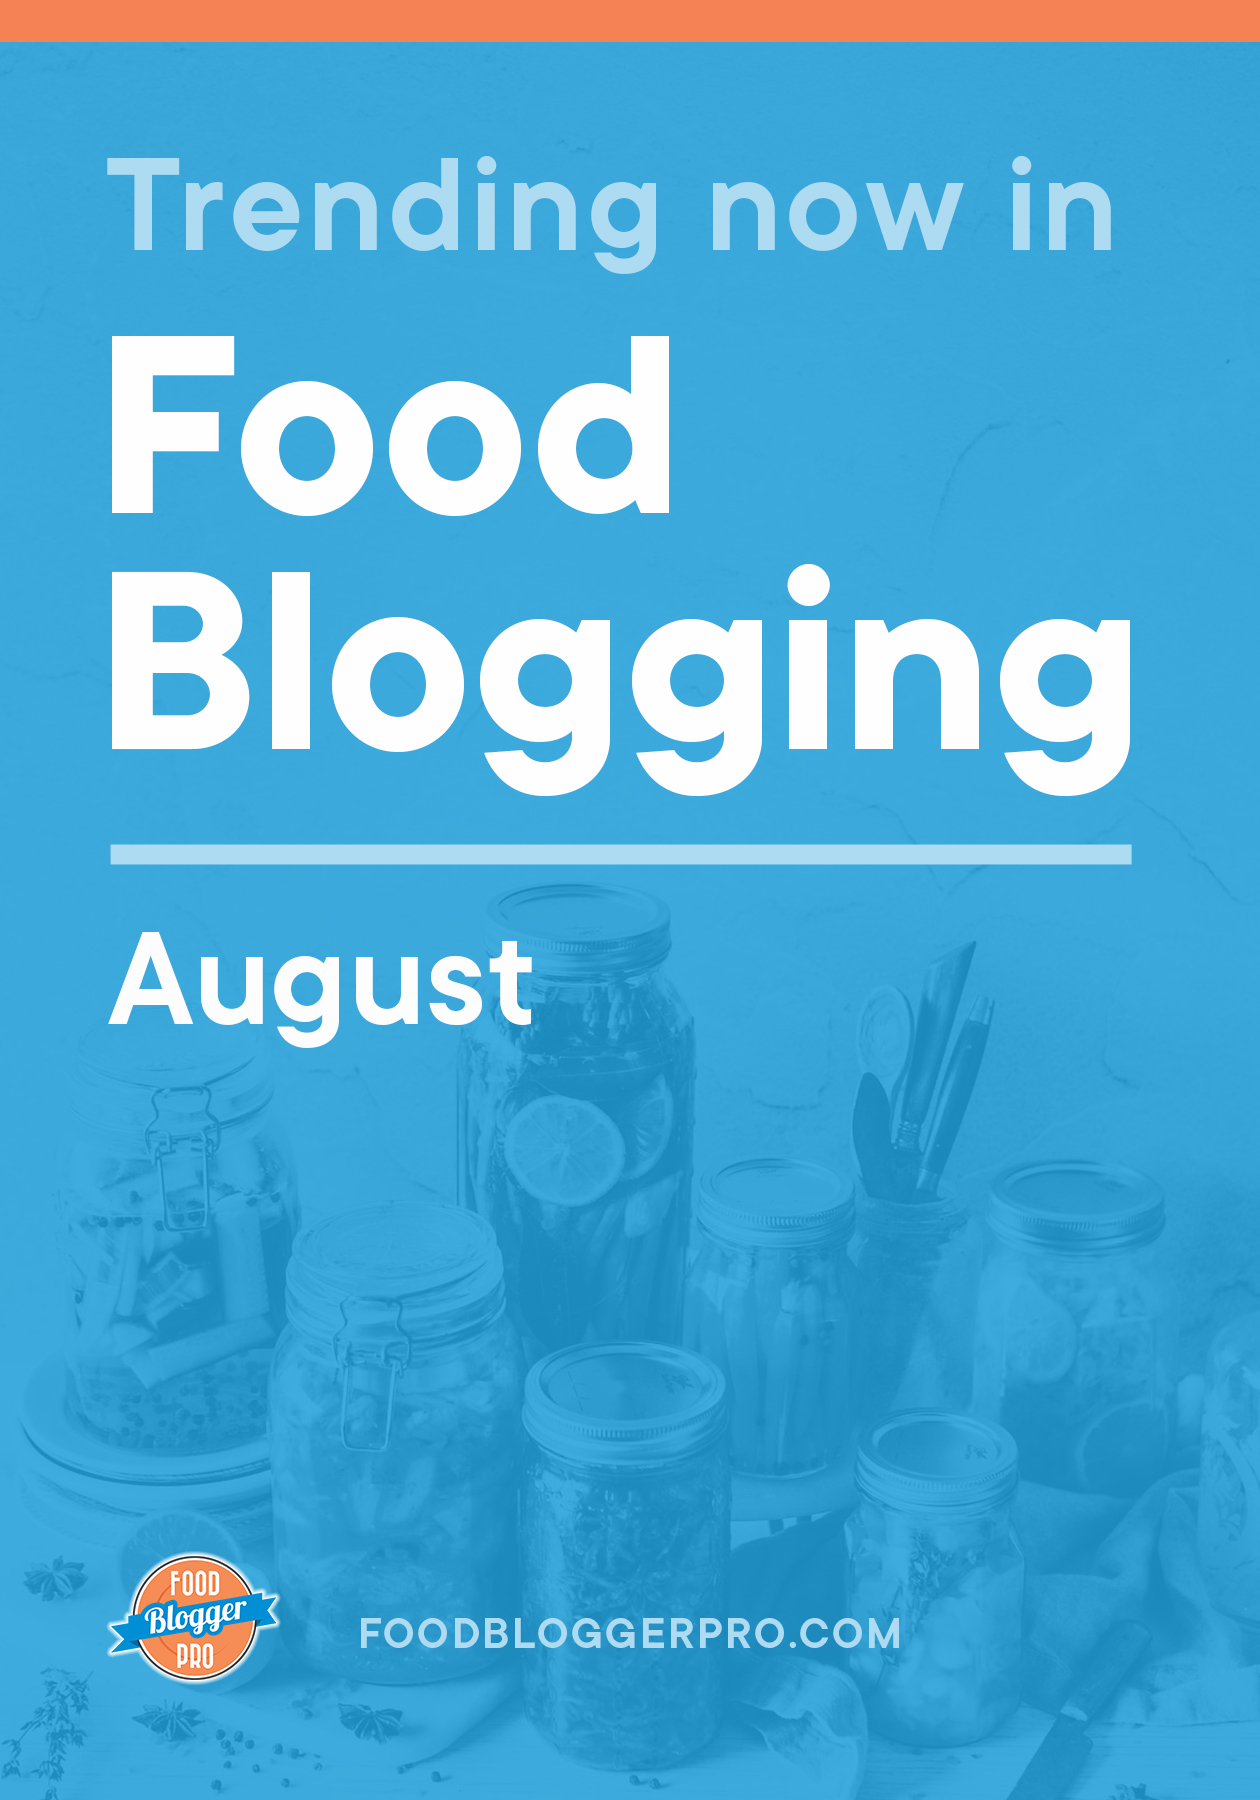 Blue graphic of jars that reads 'Trending Now in Food Blogger - August' with the Food Blogger Pro logo